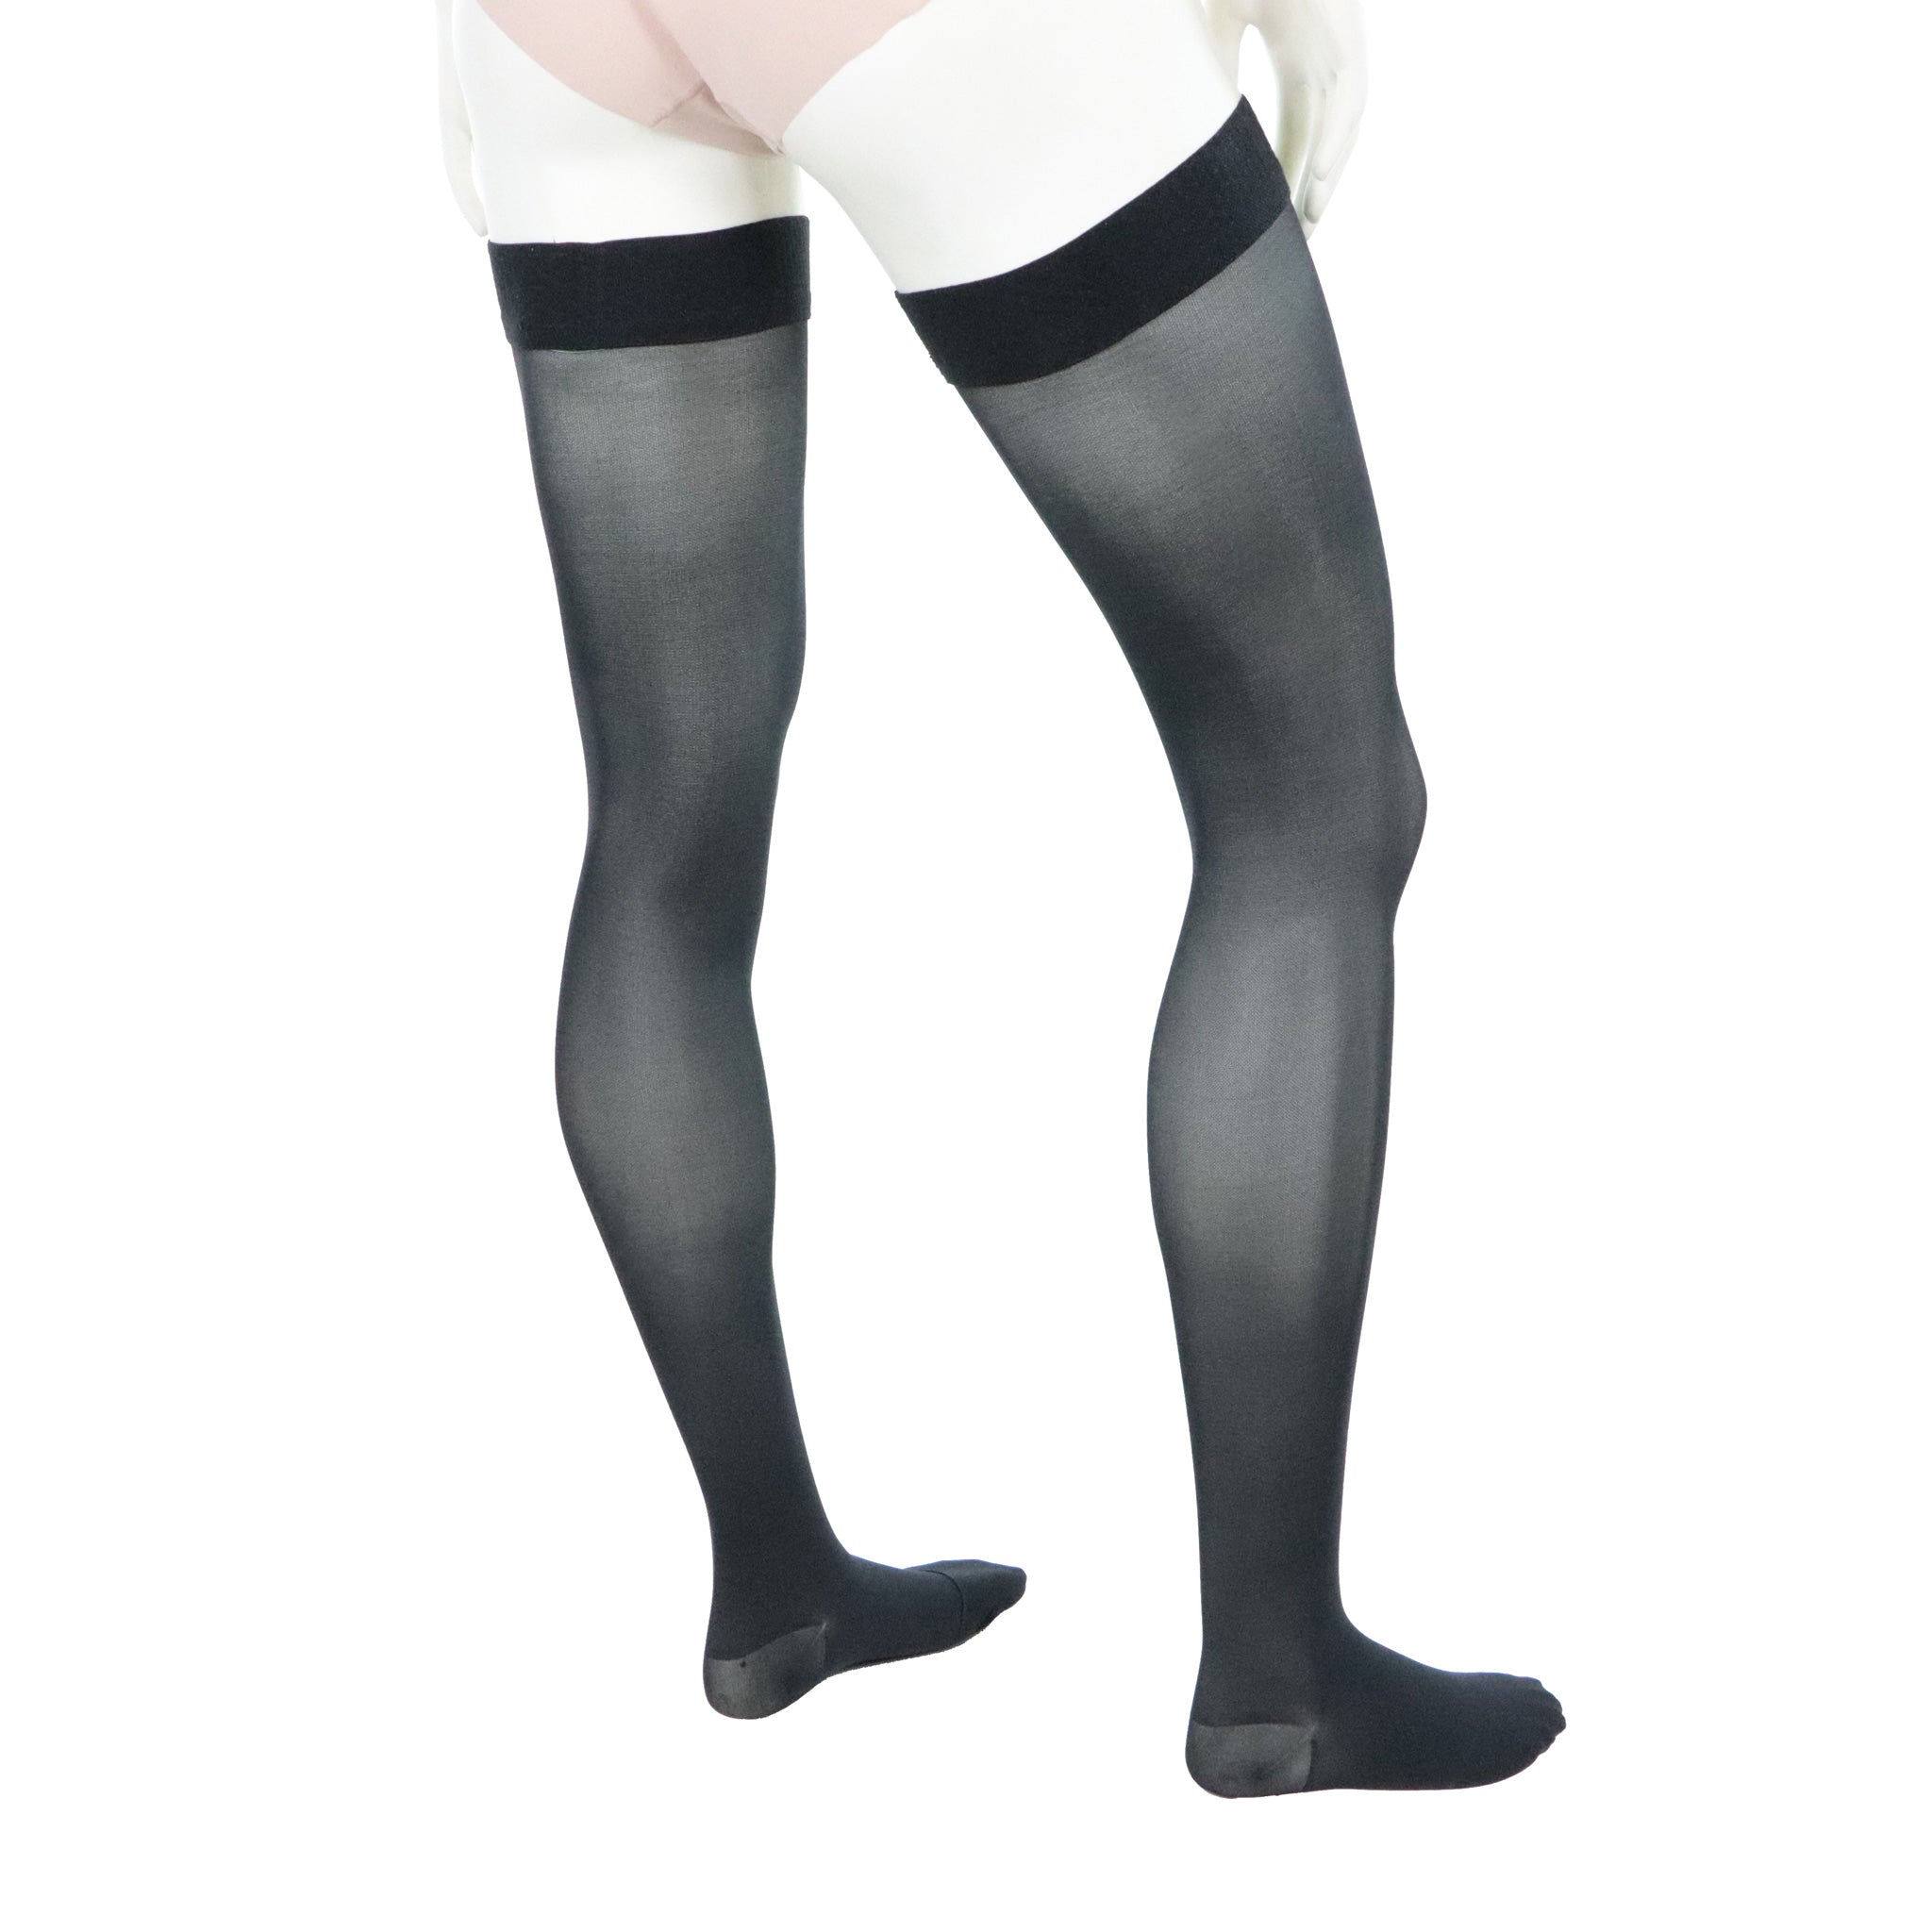 Female thigh high compression stockings 30-40 mmhg black Doctor Brace right rear view